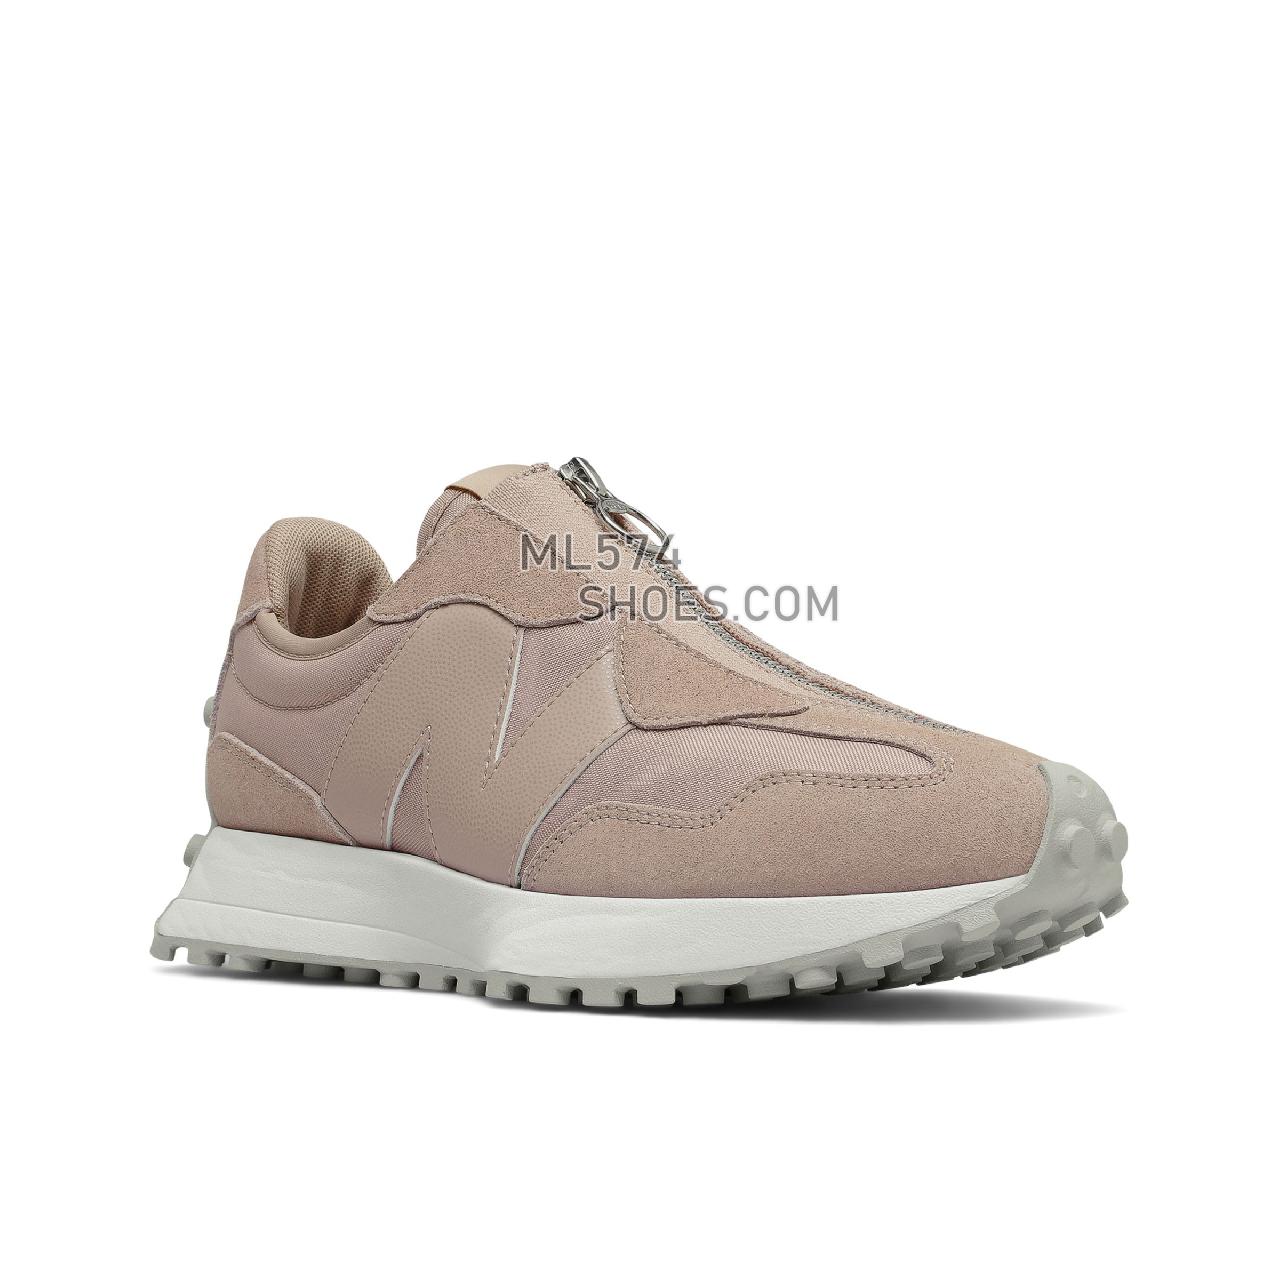 New Balance WS327AV1 - Women's Sport Style Sneakers - Au Lait with White - WS327AAB